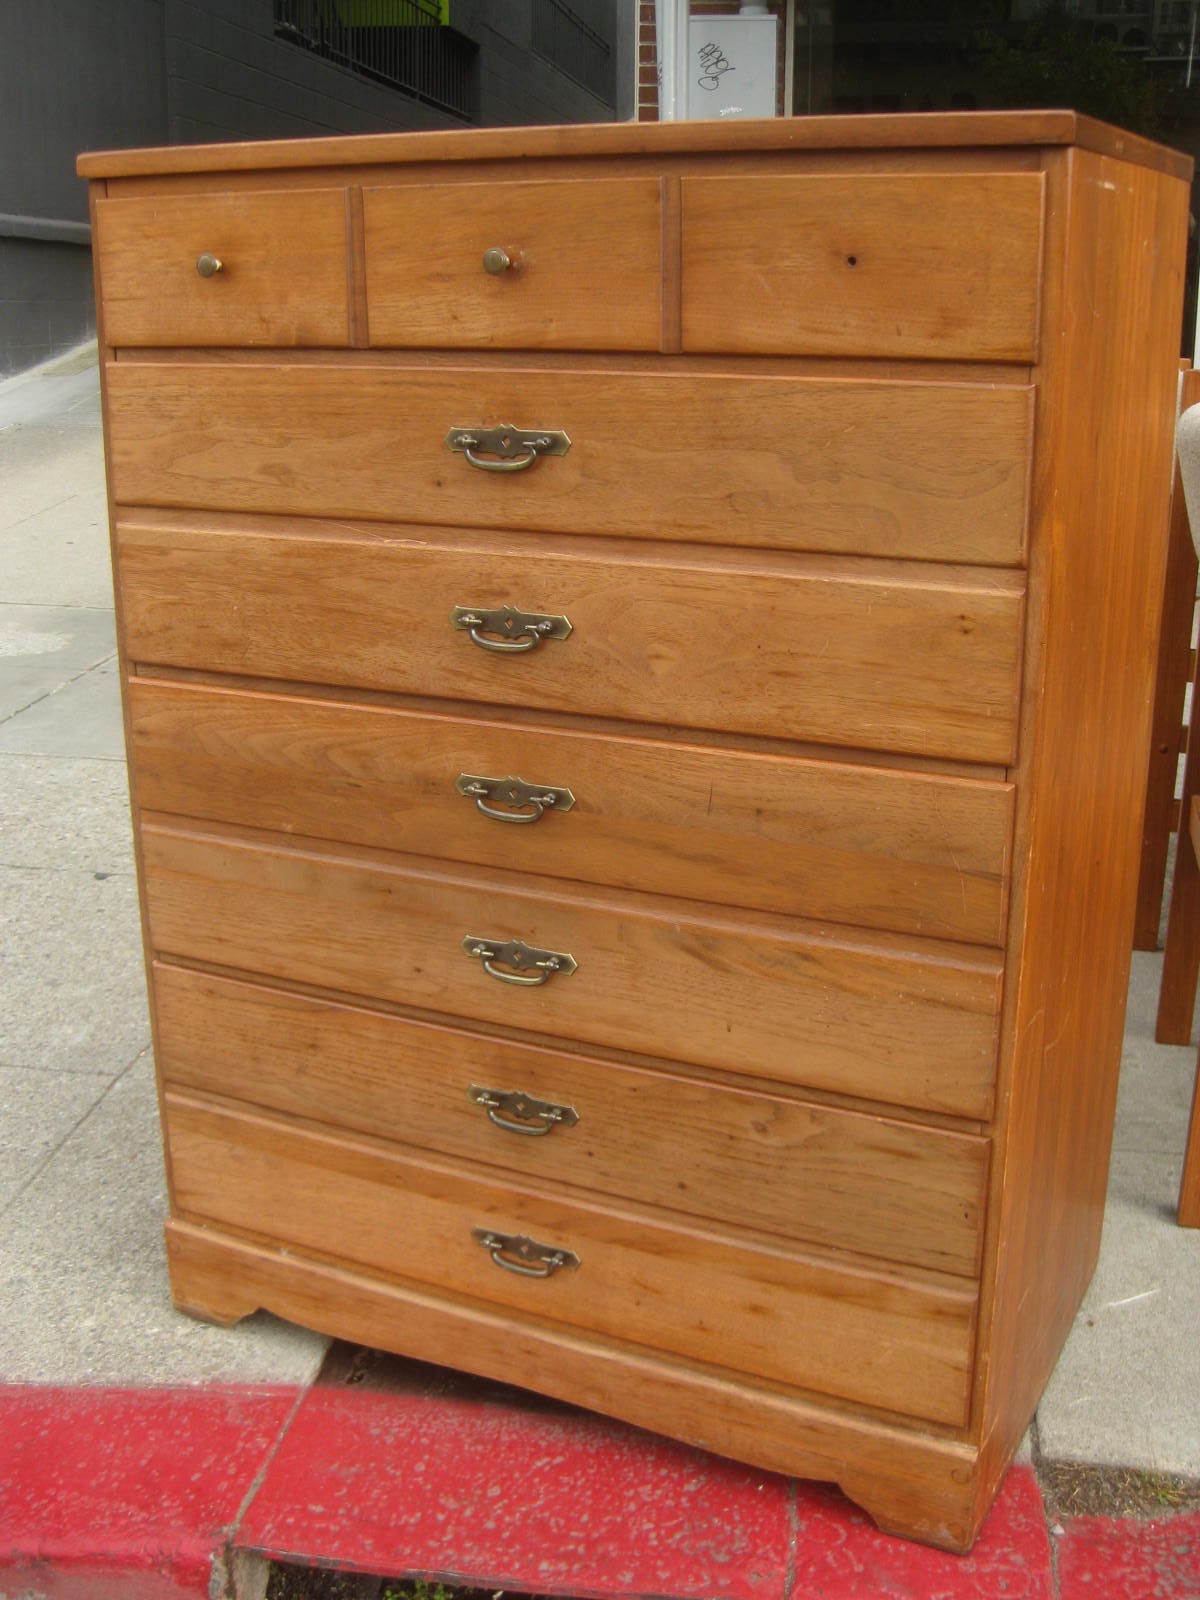 UHURU FURNITURE & COLLECTIBLES: SOLD - Kroehler Chest of Drawers - $1251200 x 1600